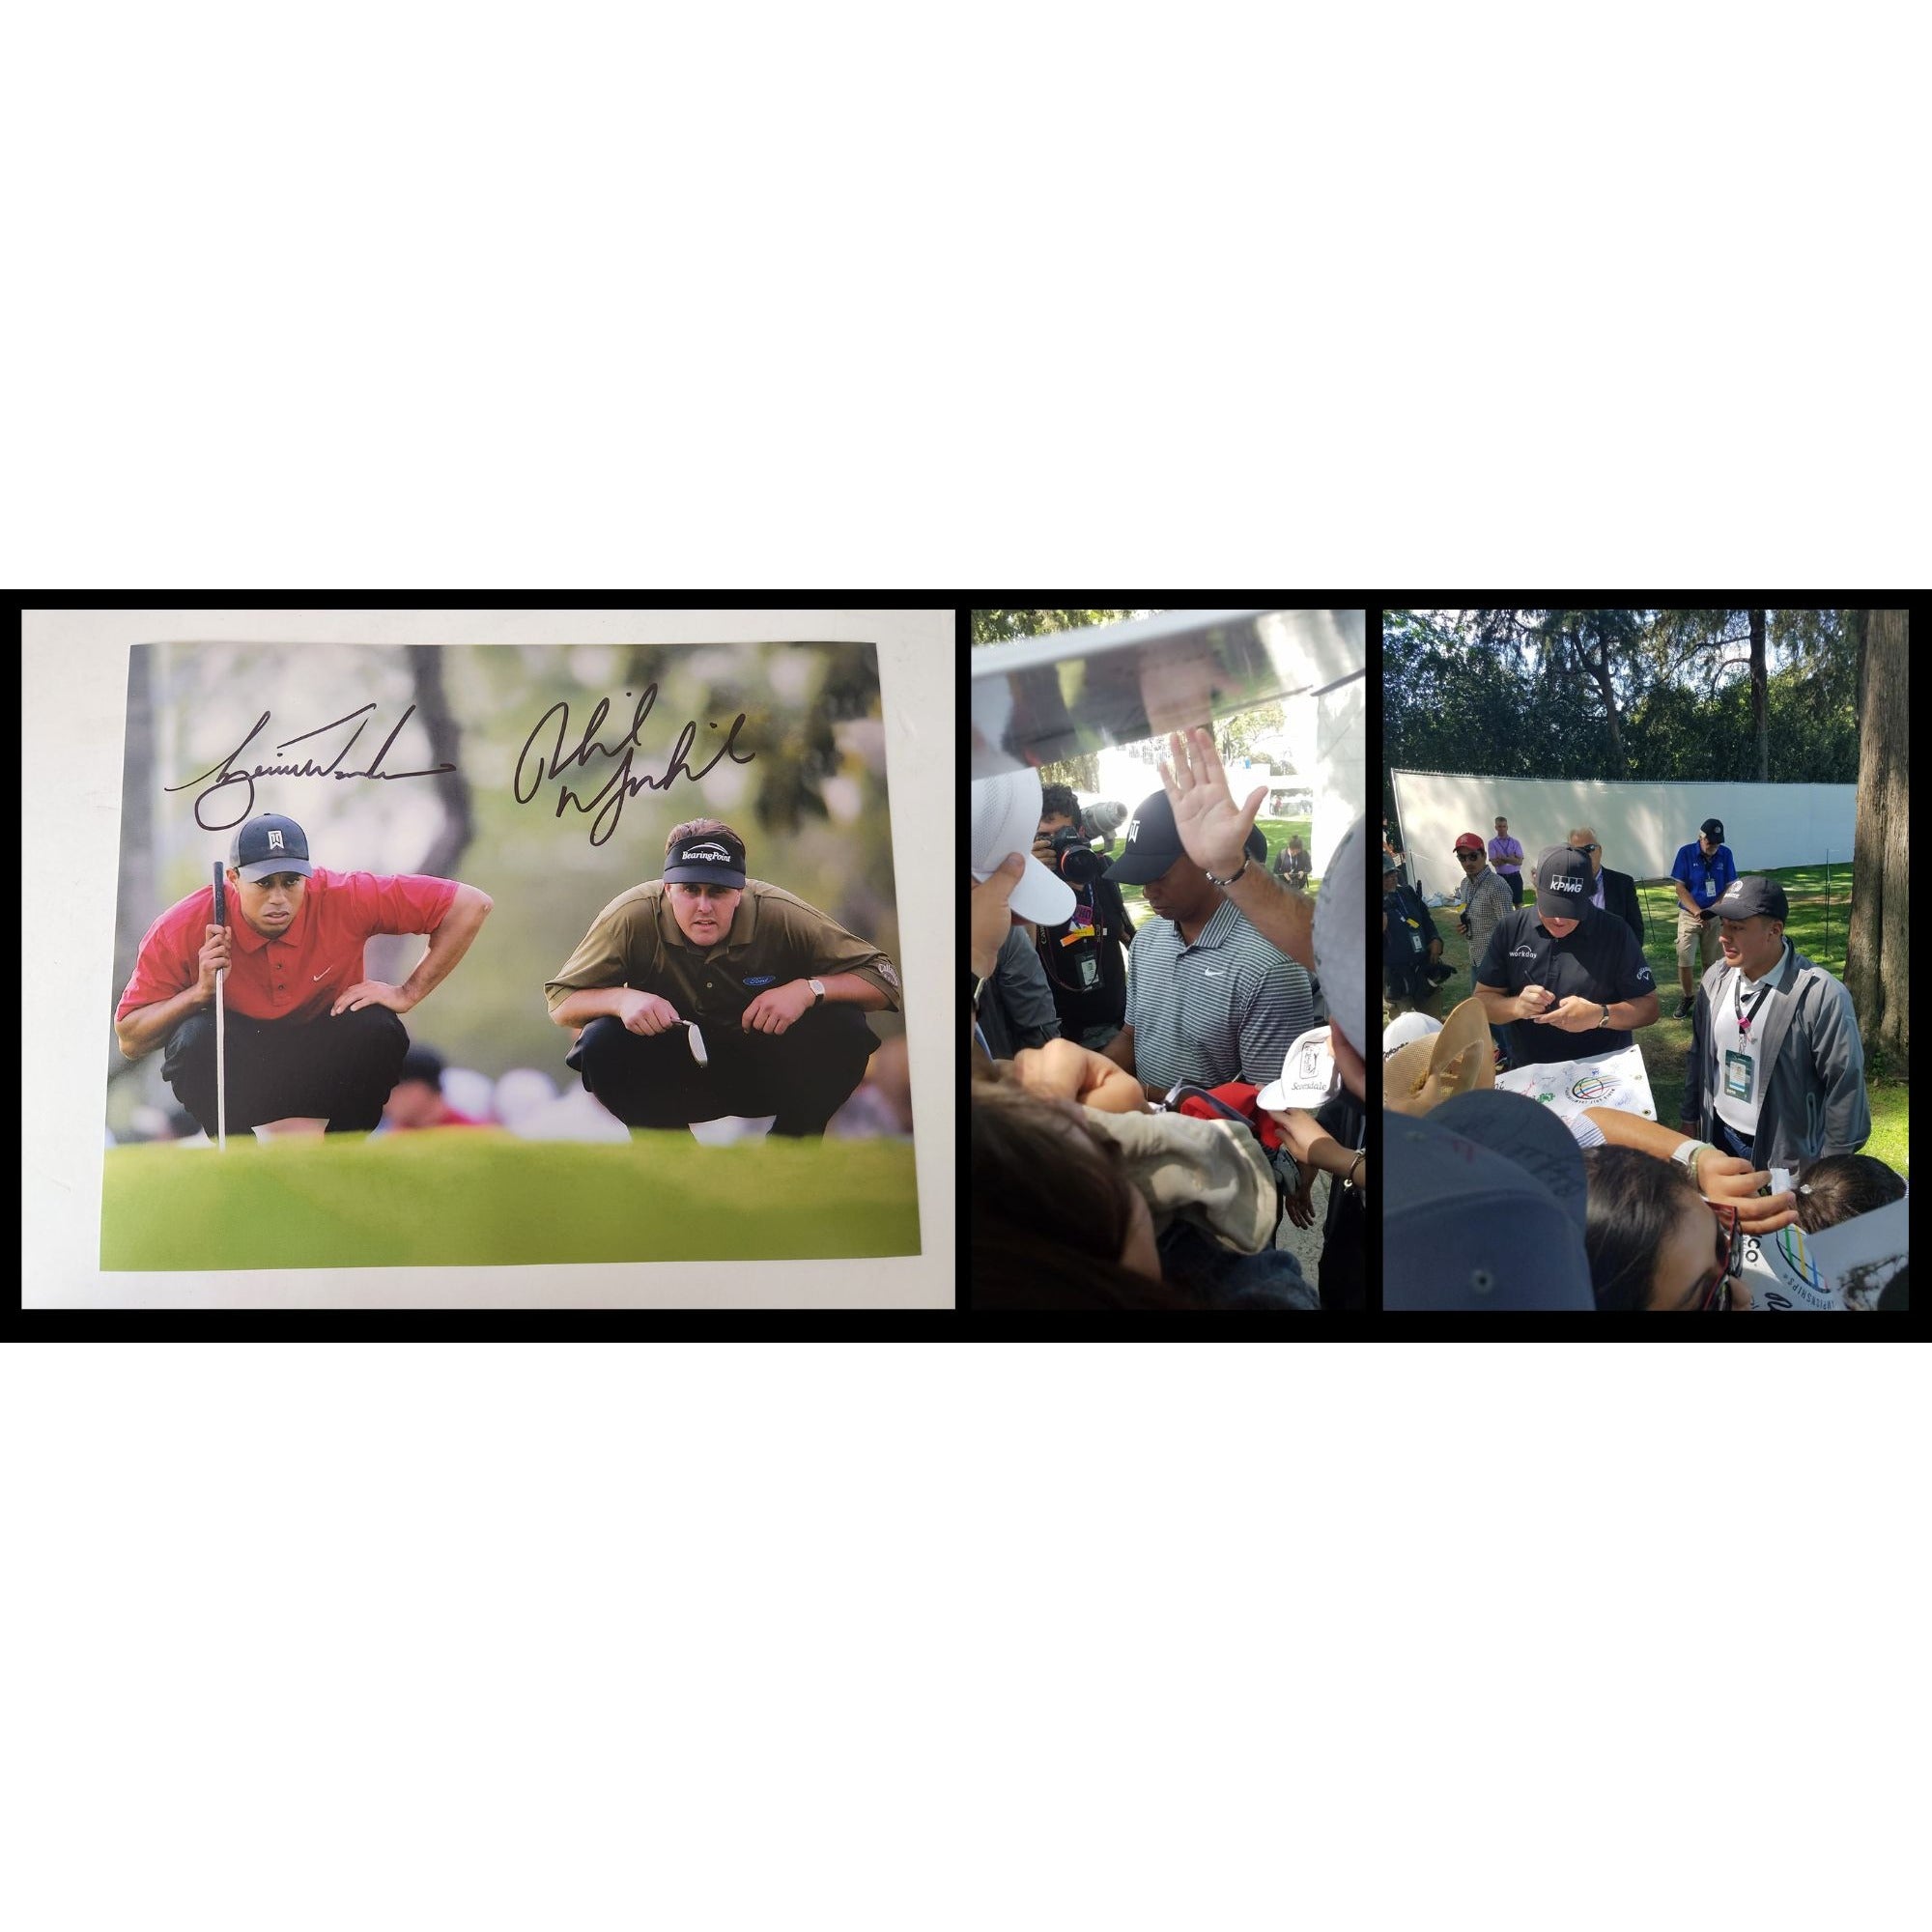 Tiger Woods and Phil Mickelson 8x10 photo signed with proof